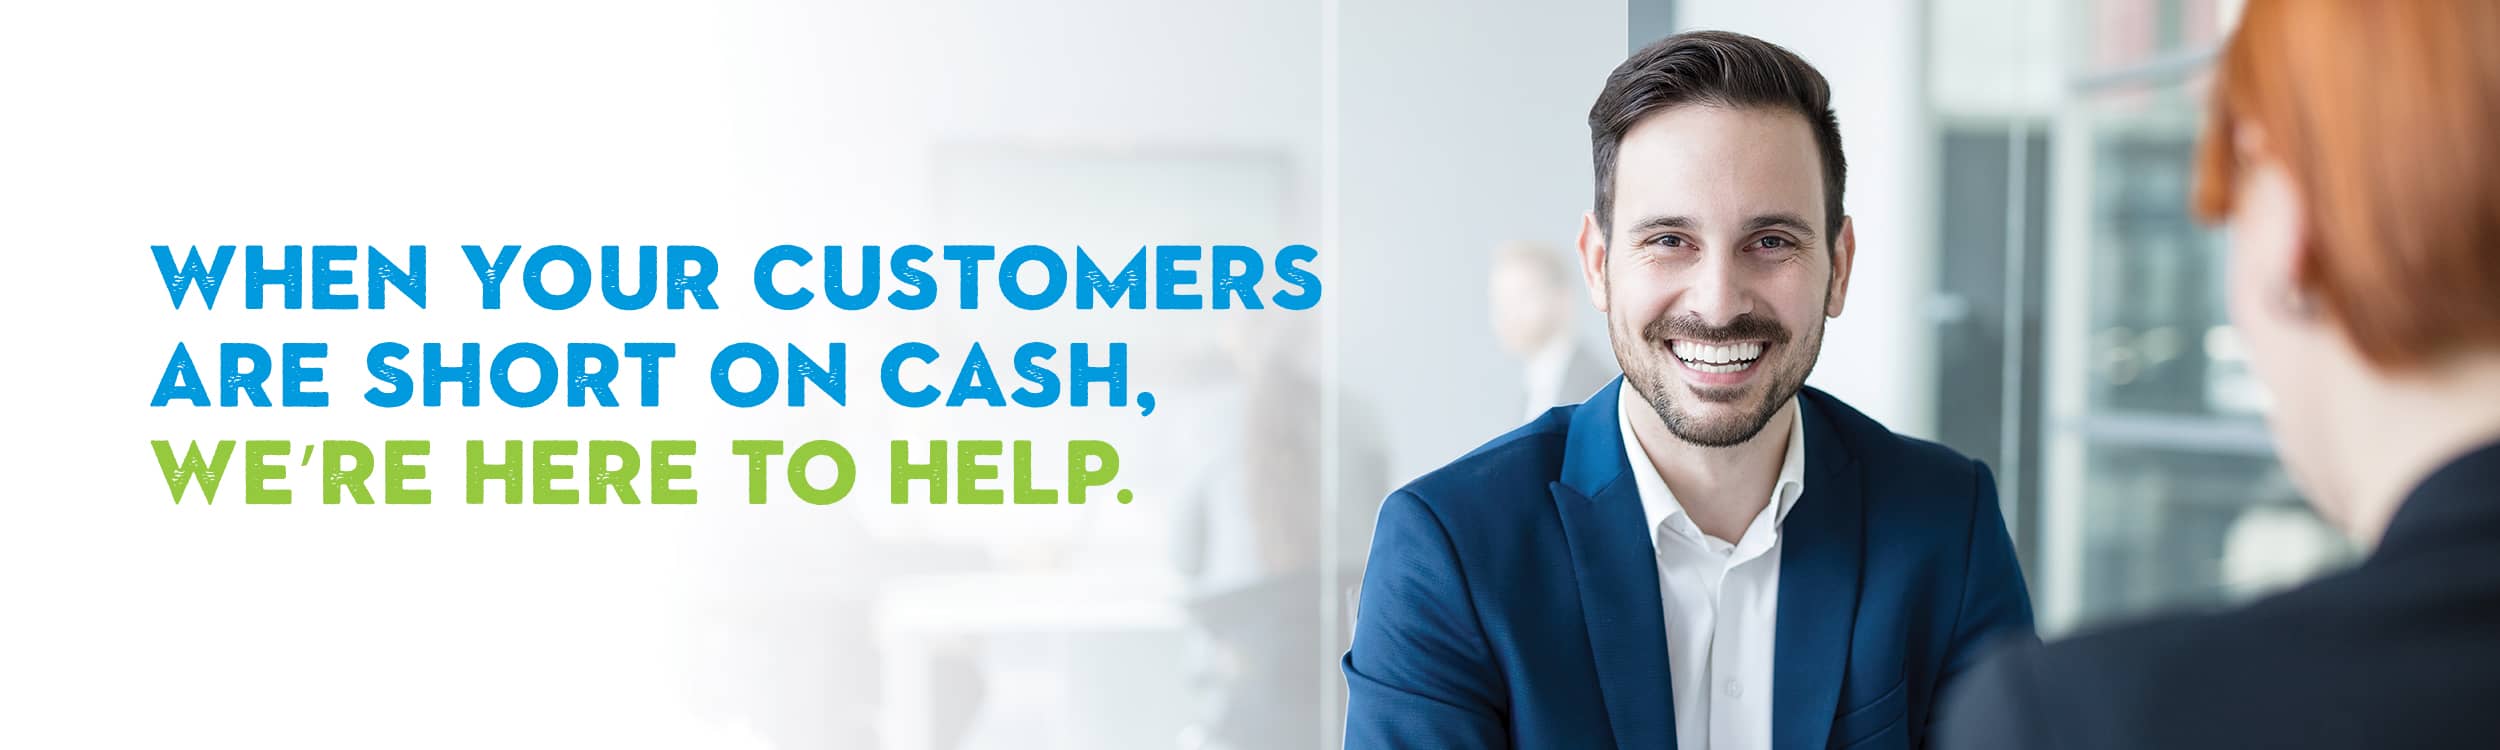 When your customers are short on cash, we’re here to help.